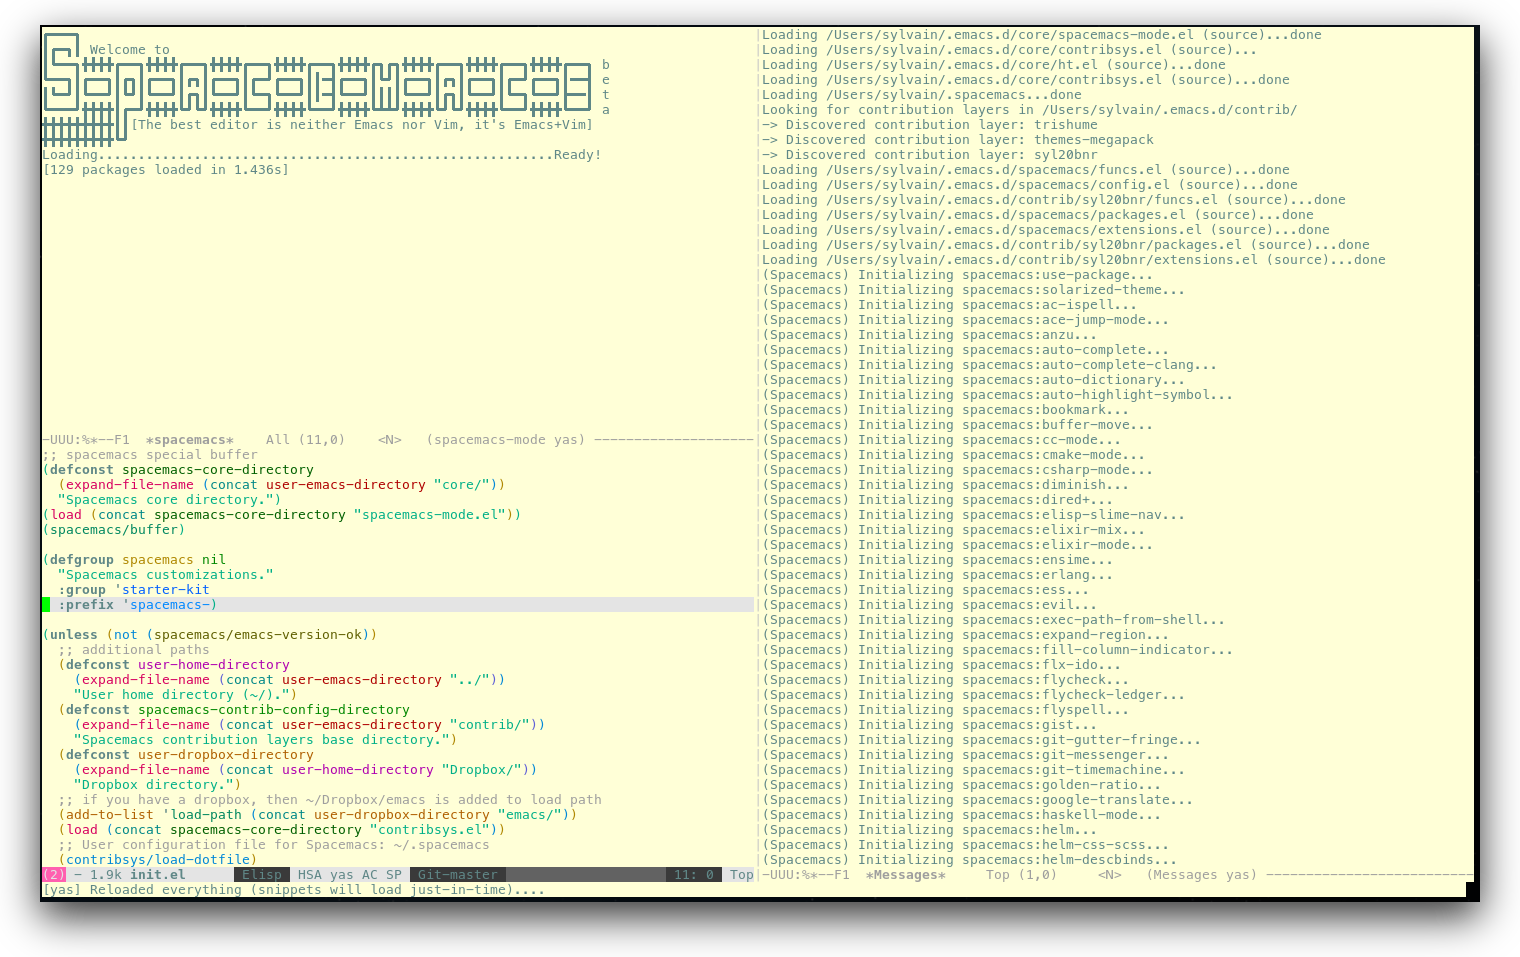 /TakeV/spacemacs/media/commit/2692332b64583df0d1abe2c9c7593da03840d719/doc/img/spacemacs-urxvt.png